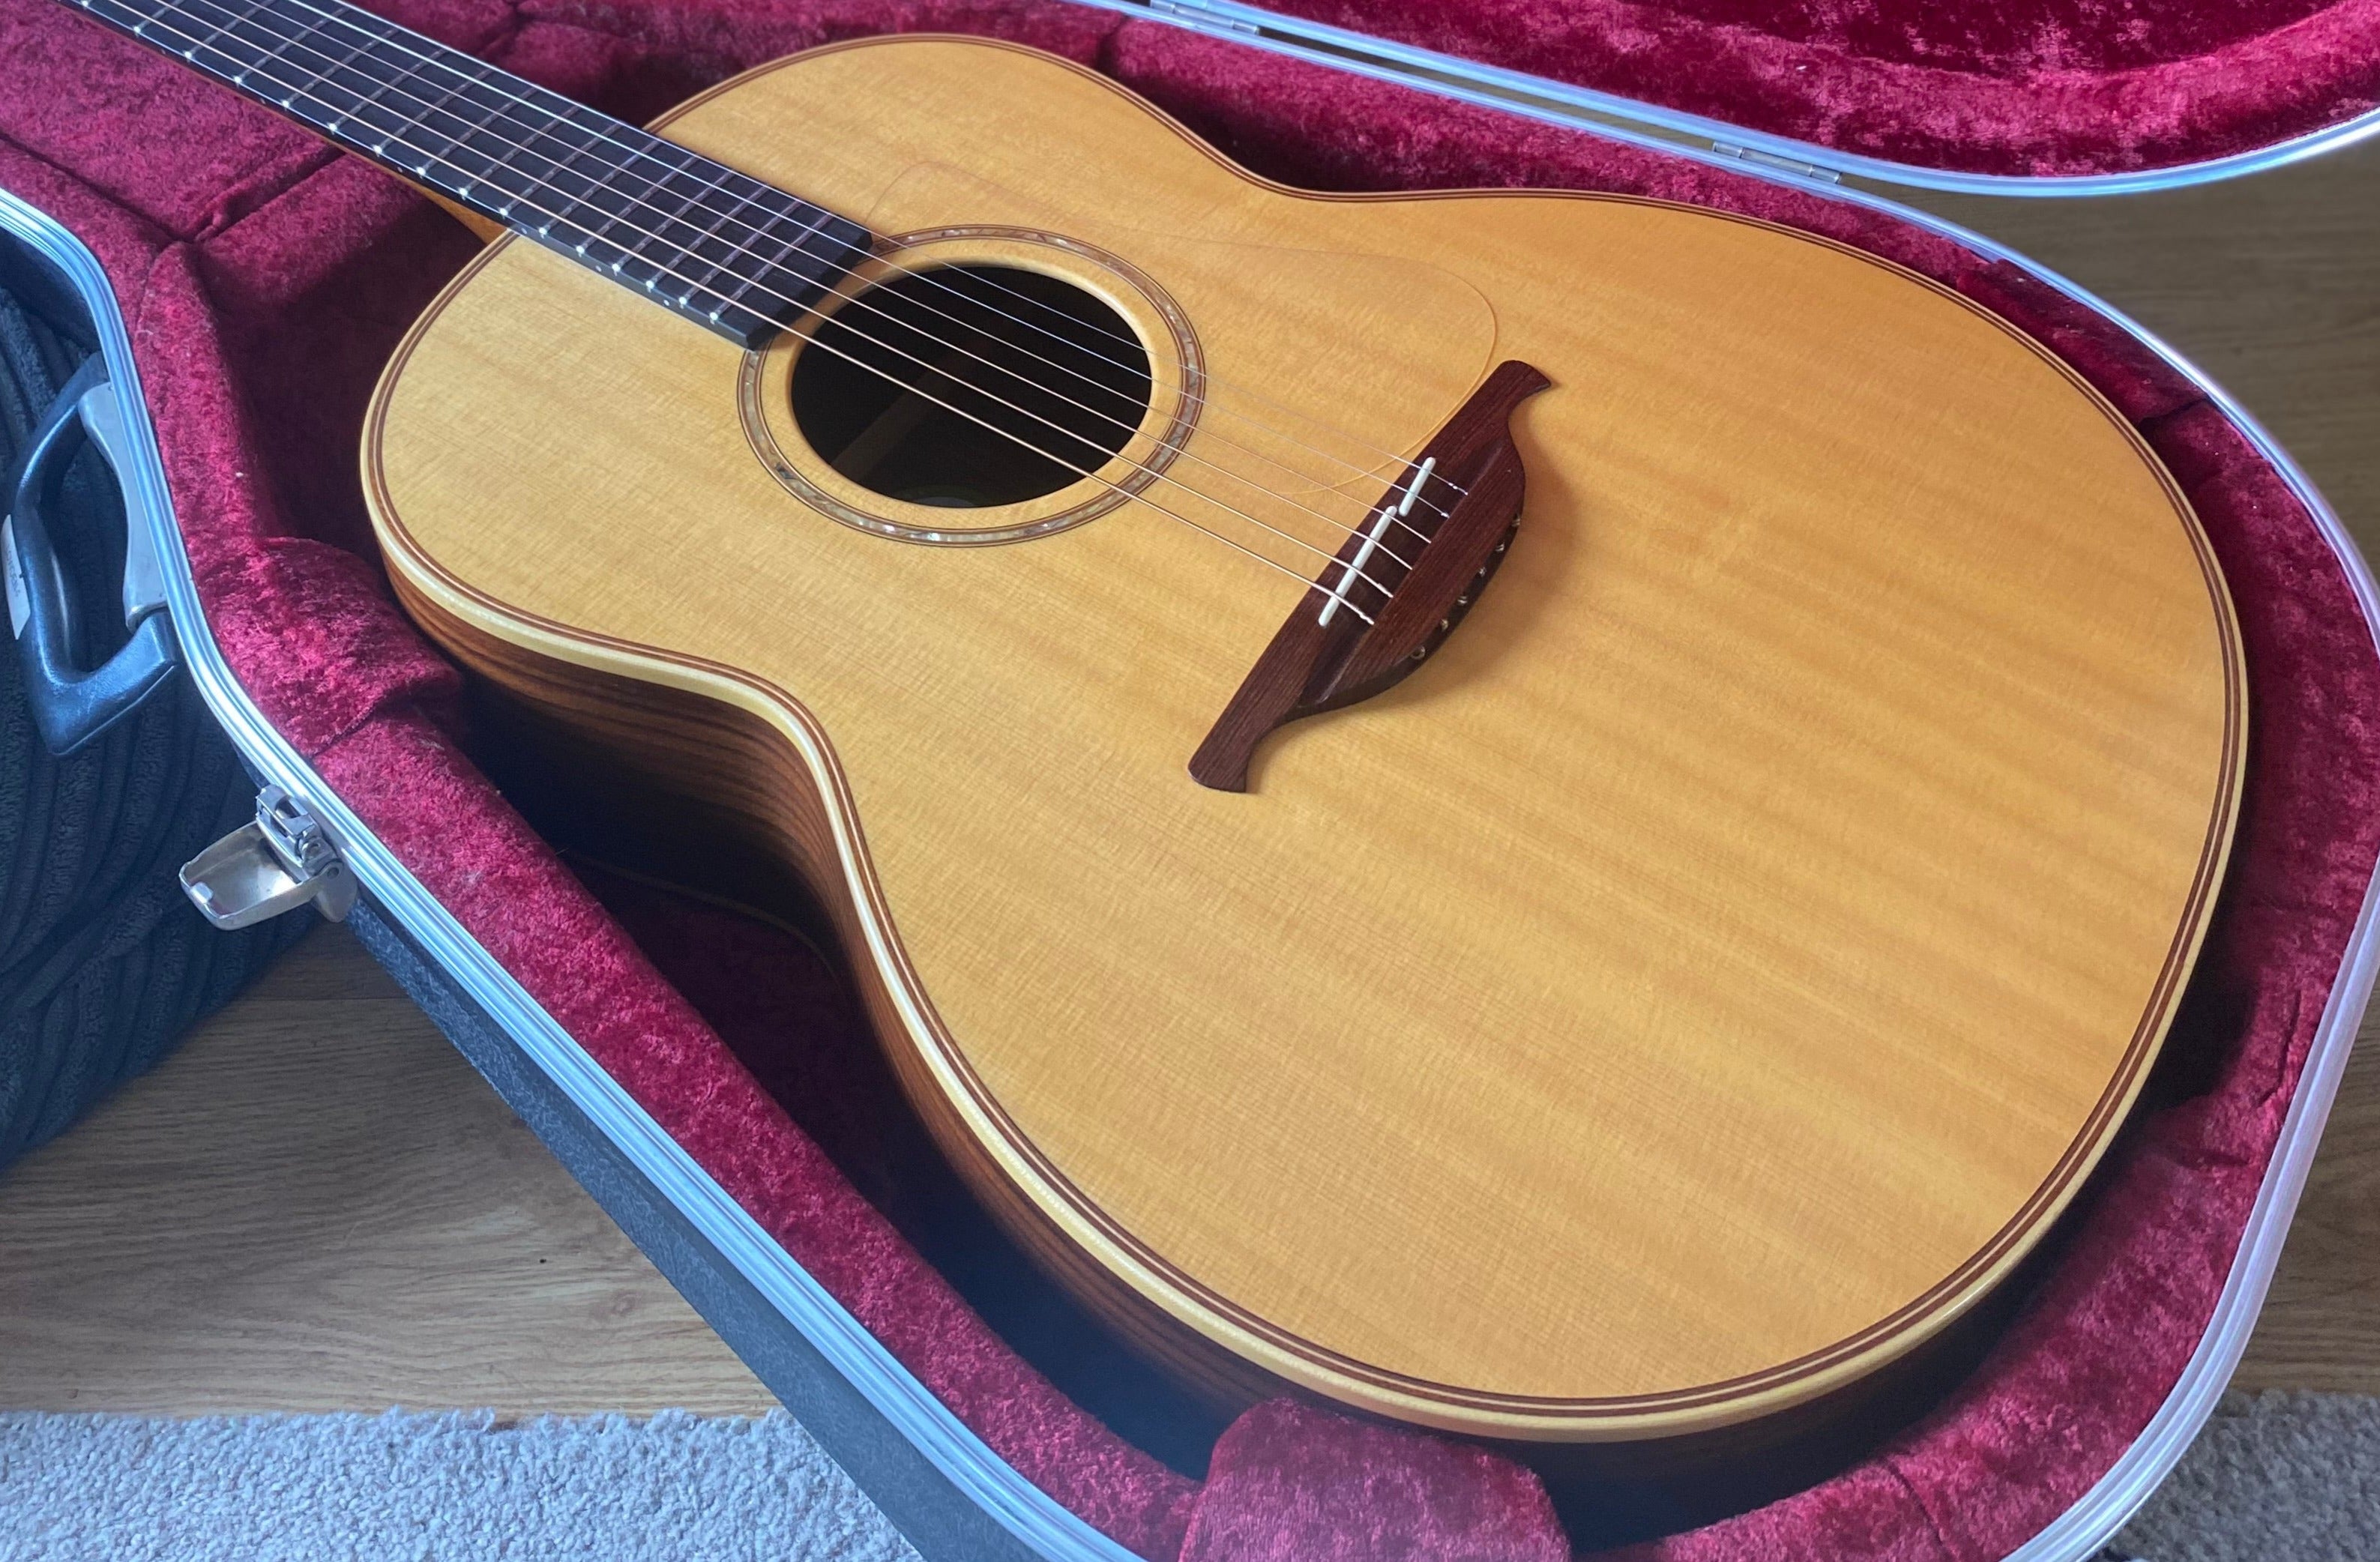 Lowden F32 Spruce/Rosewood - 26 Years Old  (1996)  serial no. 9946 - A1 Condition, Acoustic Guitar for sale at Richards Guitars.